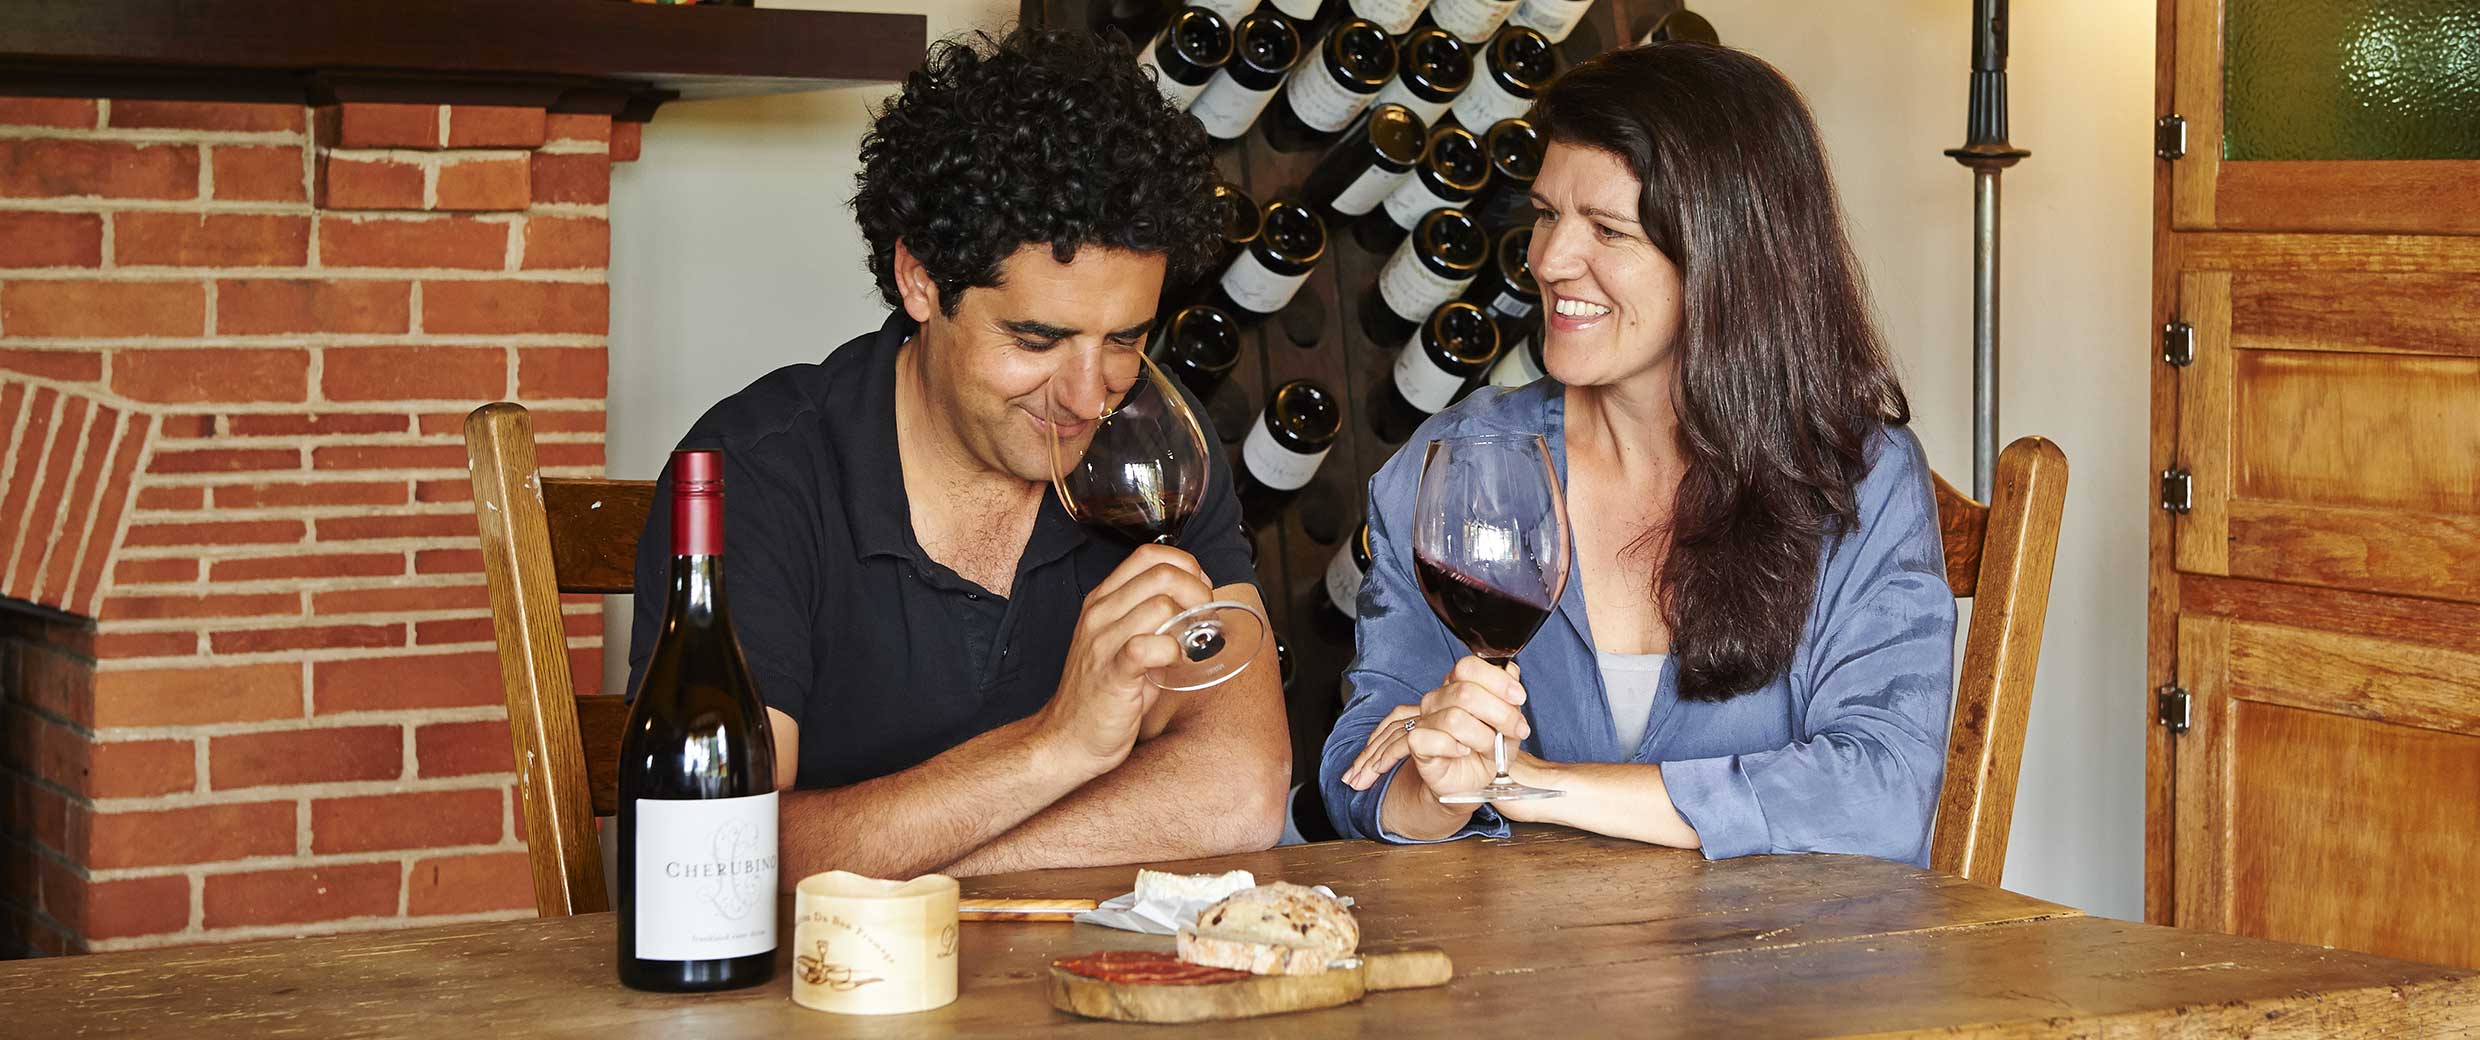 Larry with his dark curly hair, wearing a black polo neck and his wife Edwina with long dark hair, wearing a mid blue shirt, sit at a wooden table upon which is a block of cheese, a bottle of red wine and they are sampling. A red brick fireplace is behind on the left, and a large wine rack is behind them.